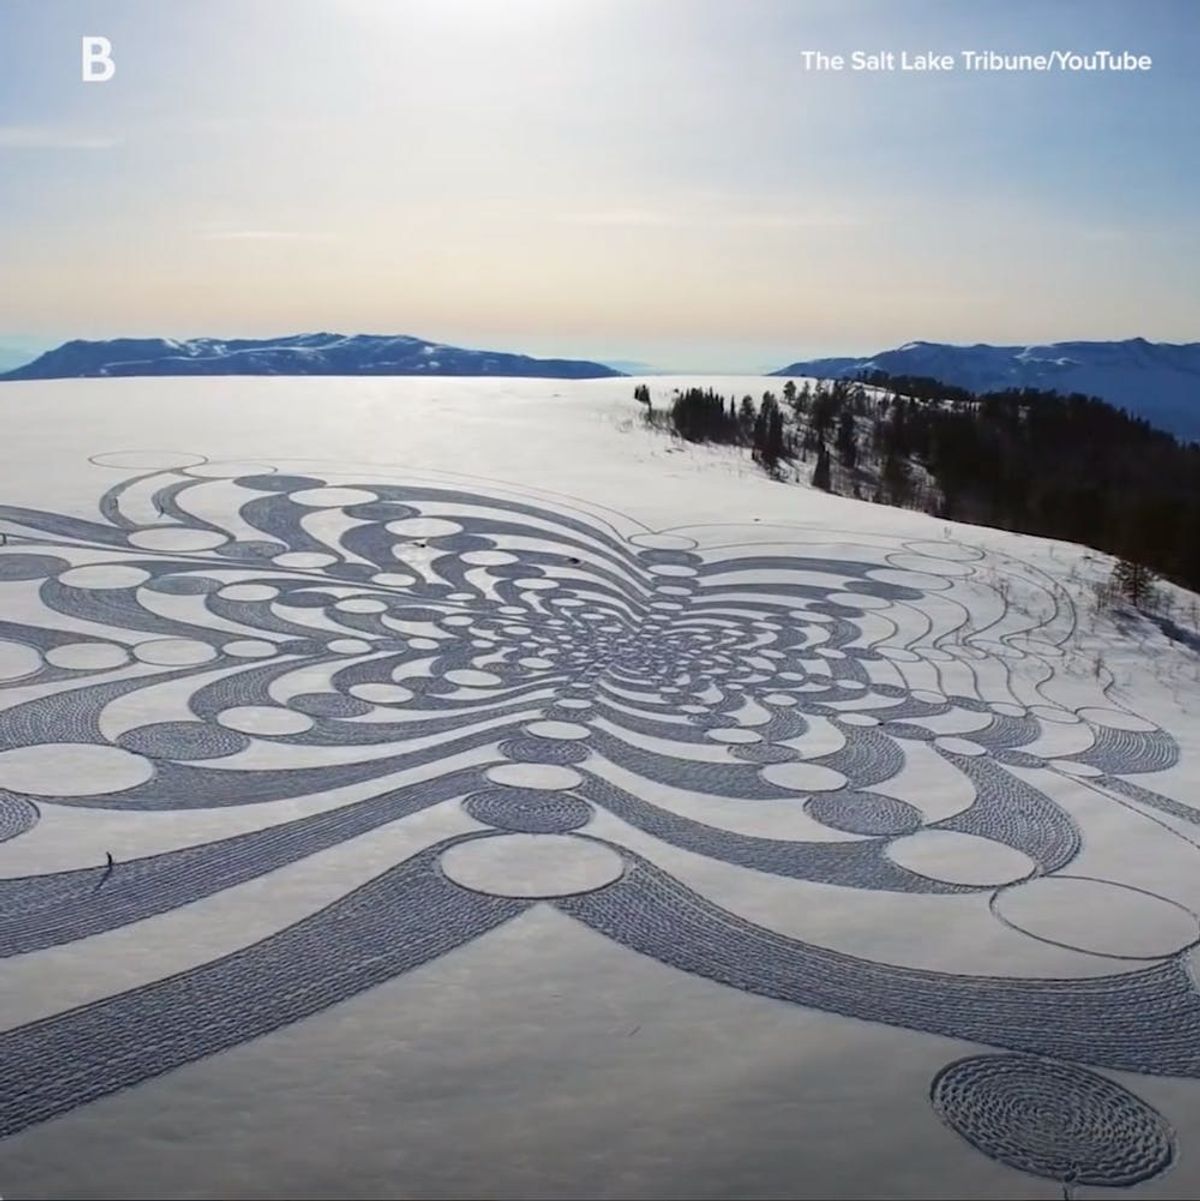 These Snow Masterpieces Will Take Your Breath Away